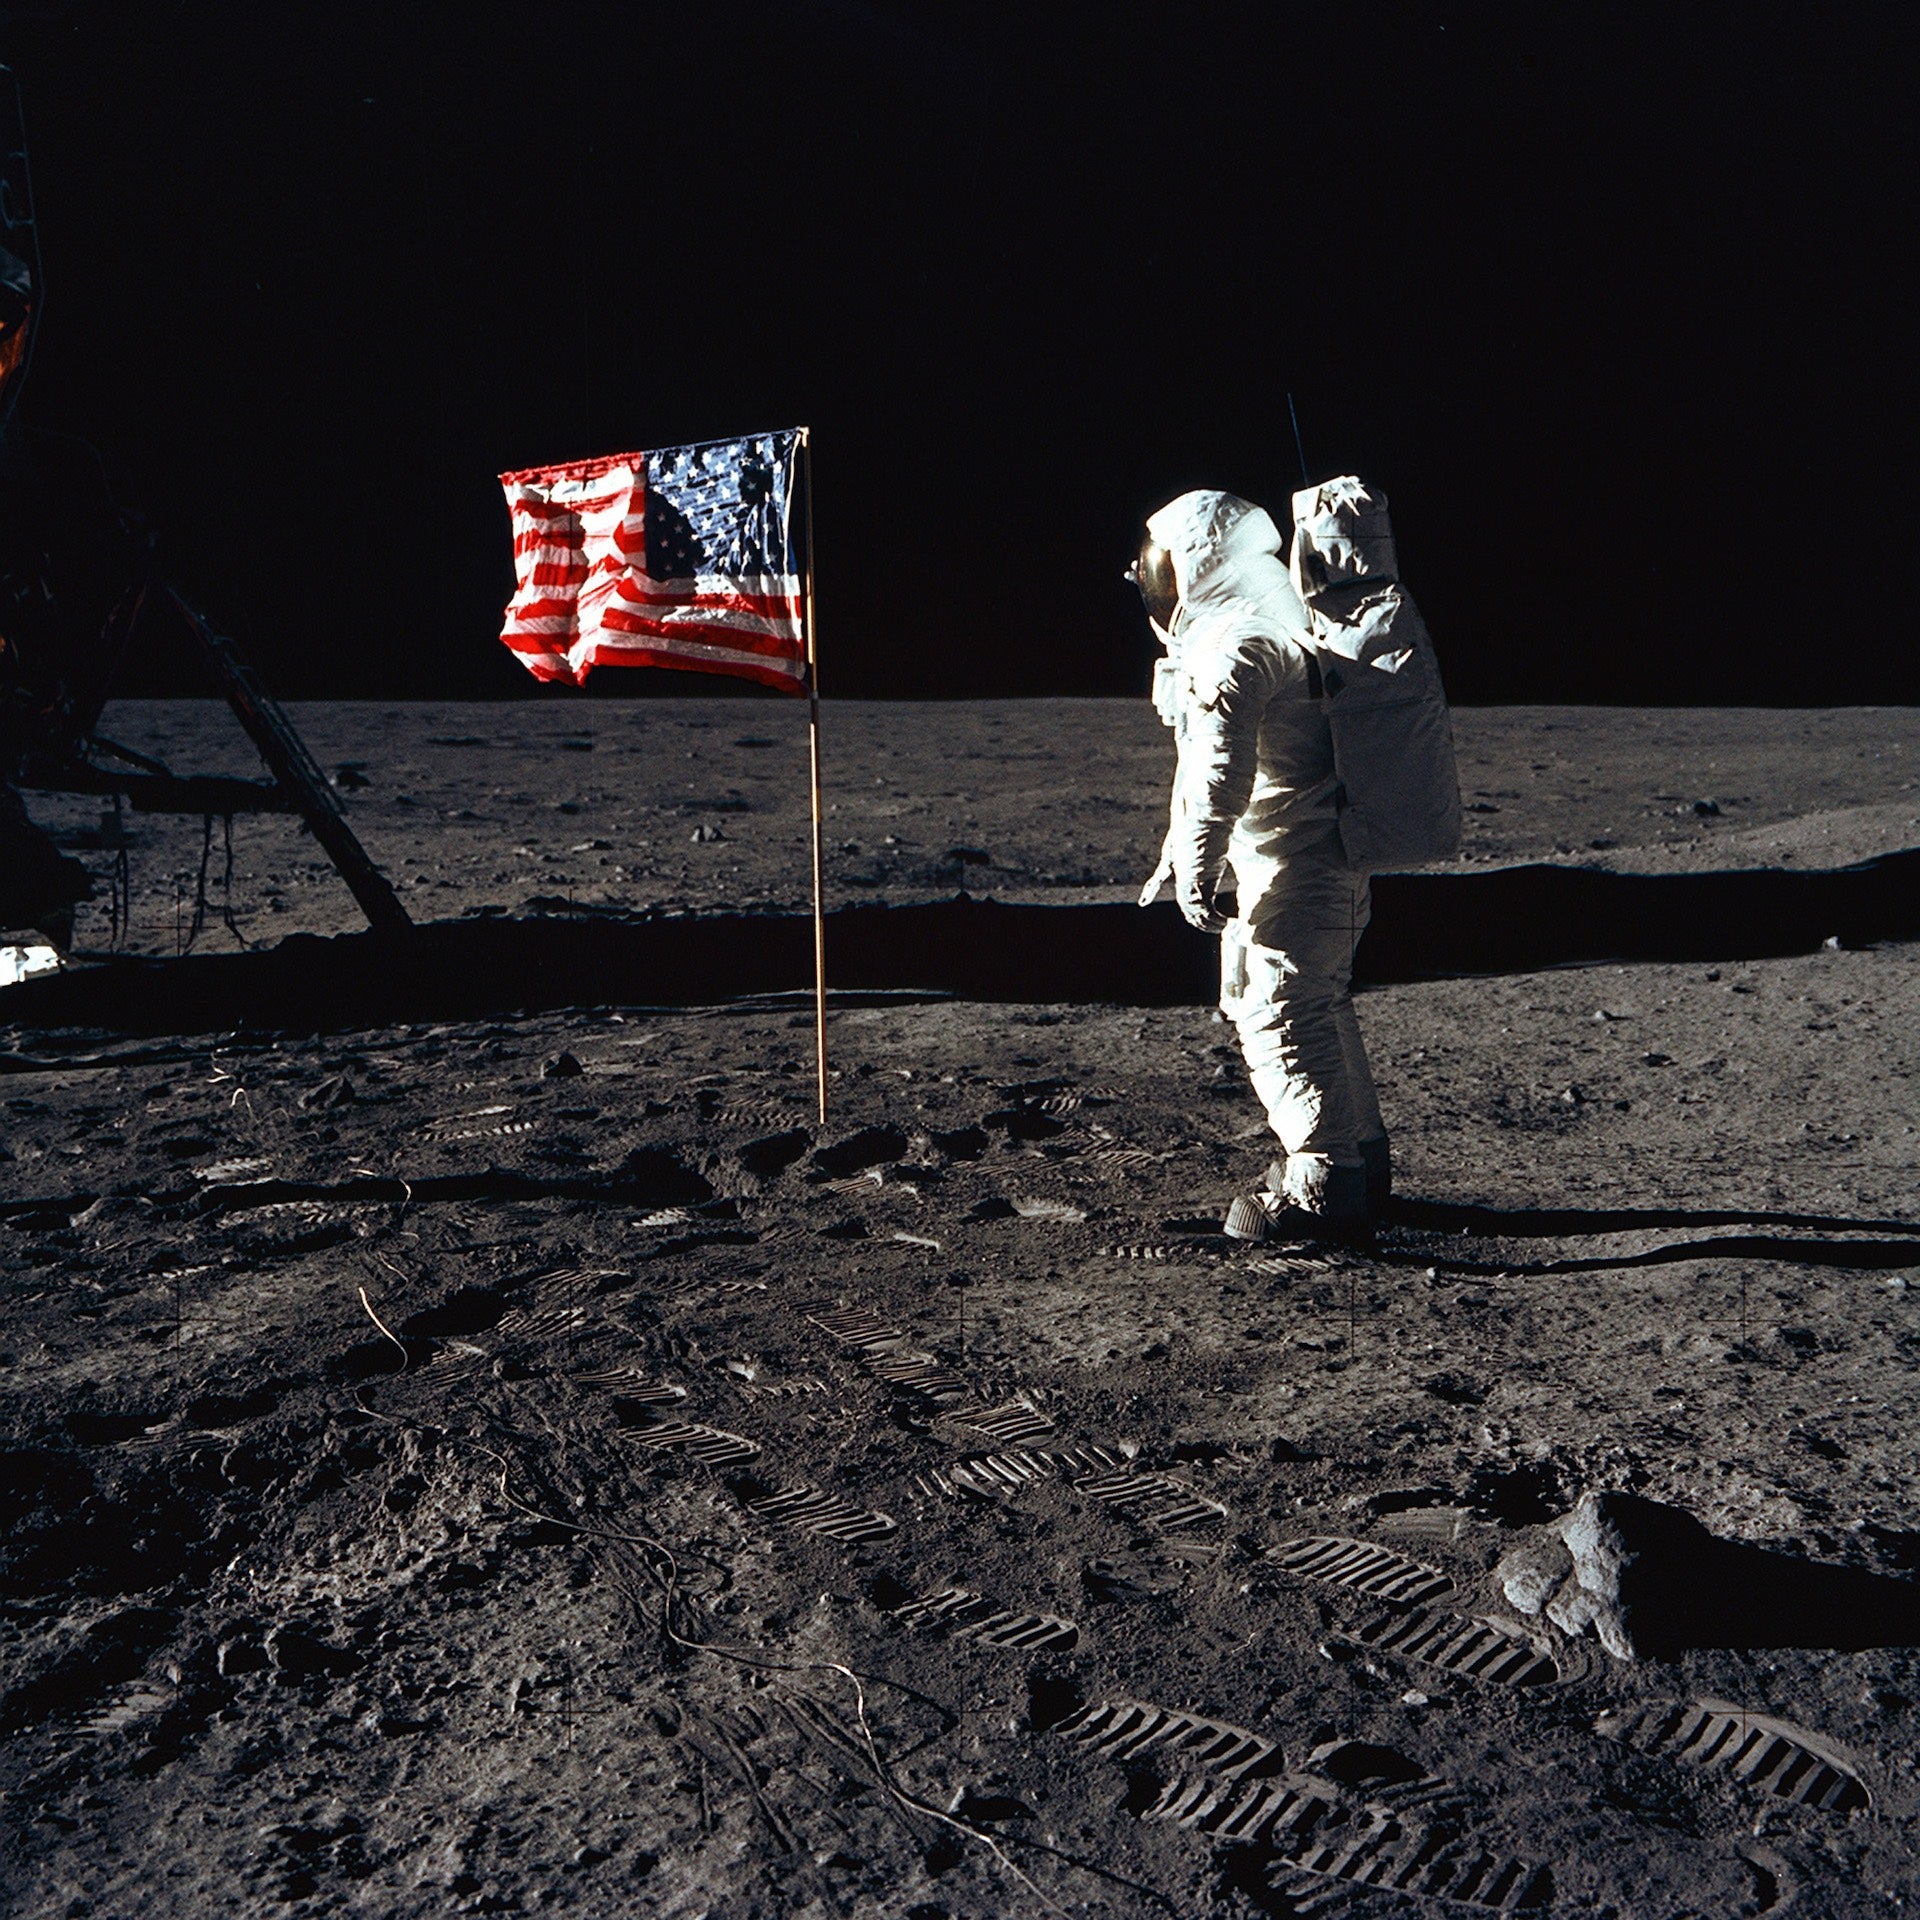 Astronaut Buzz Aldrin, lunar module pilot of the first lunar landing mission, poses for a photograph beside the deployed United States flag during an Apollo 11 Extravehicular Activity (EVA) on the lunar surface. The Lunar Module (LM) is on the left, and the footprints of the astronauts are clearly visible in the soil of the Moon. Astronaut Neil A. Armstrong, commander, took this picture with a 70mm Hasselblad lunar surface camera. While astronauts Armstrong and Aldrin descended in the LM, the "Eagle", to explore the Sea of Tranquility region of the Moon, astronaut Michael Collins, command module pilot, remained with the Command and Service Modules (CSM) "Columbia" in lunar-orbit.